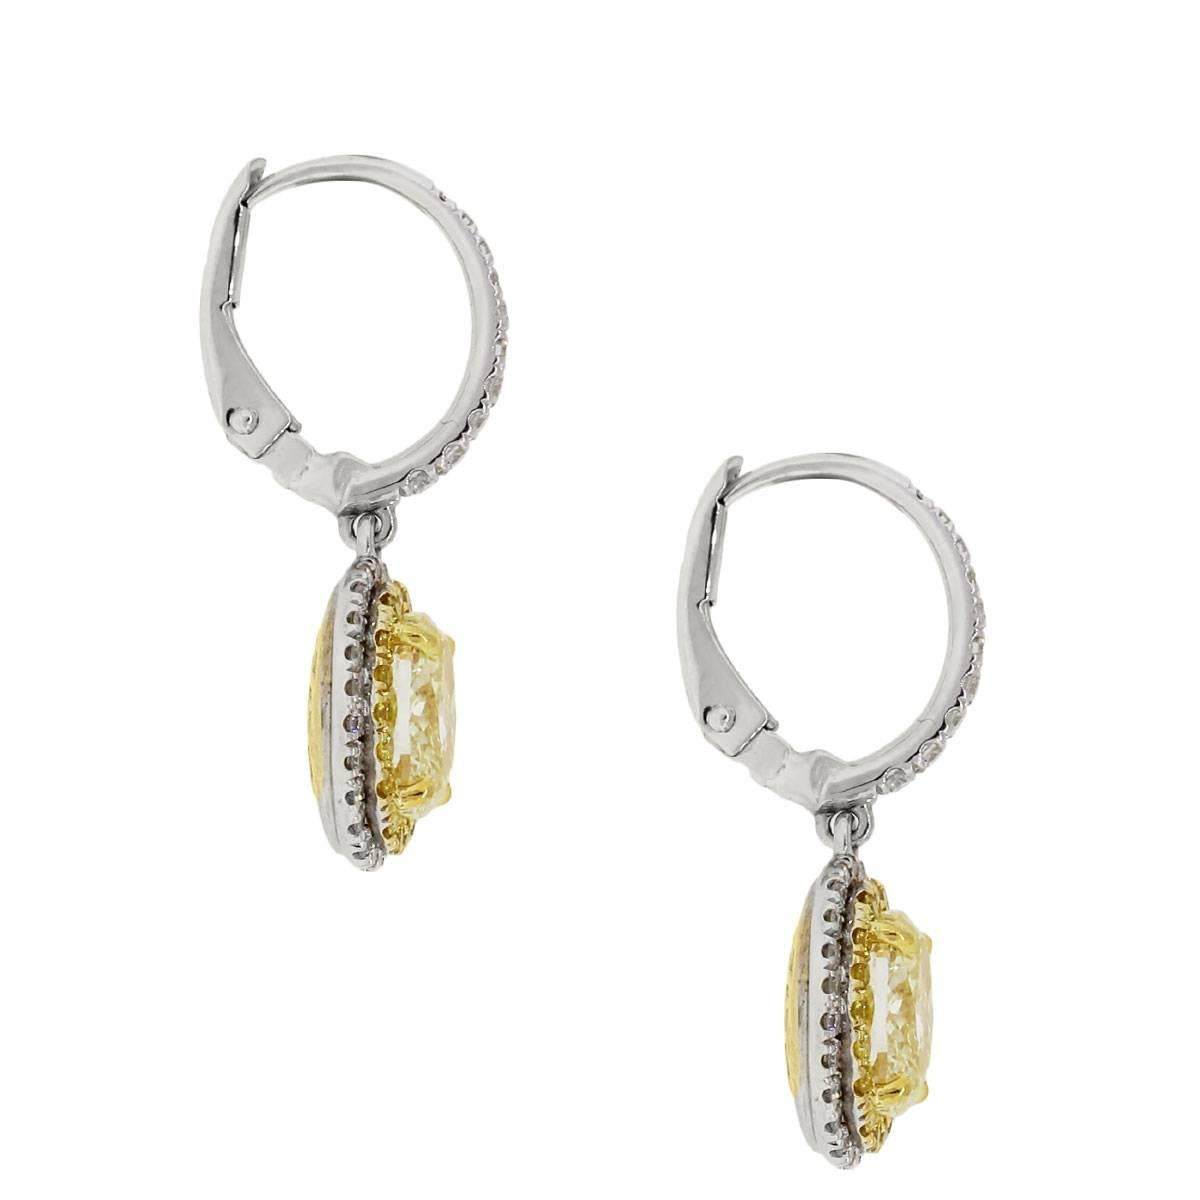 Material: 18k white and yellow gold
Style: Drop dangle earrings
Diamond Details: Approximately 2.01ctw of oval shape fancy yellow diamonds. Approximately 0.45ctw of round brilliant diamonds.
Earring Measurements: 1" x 0.42" x